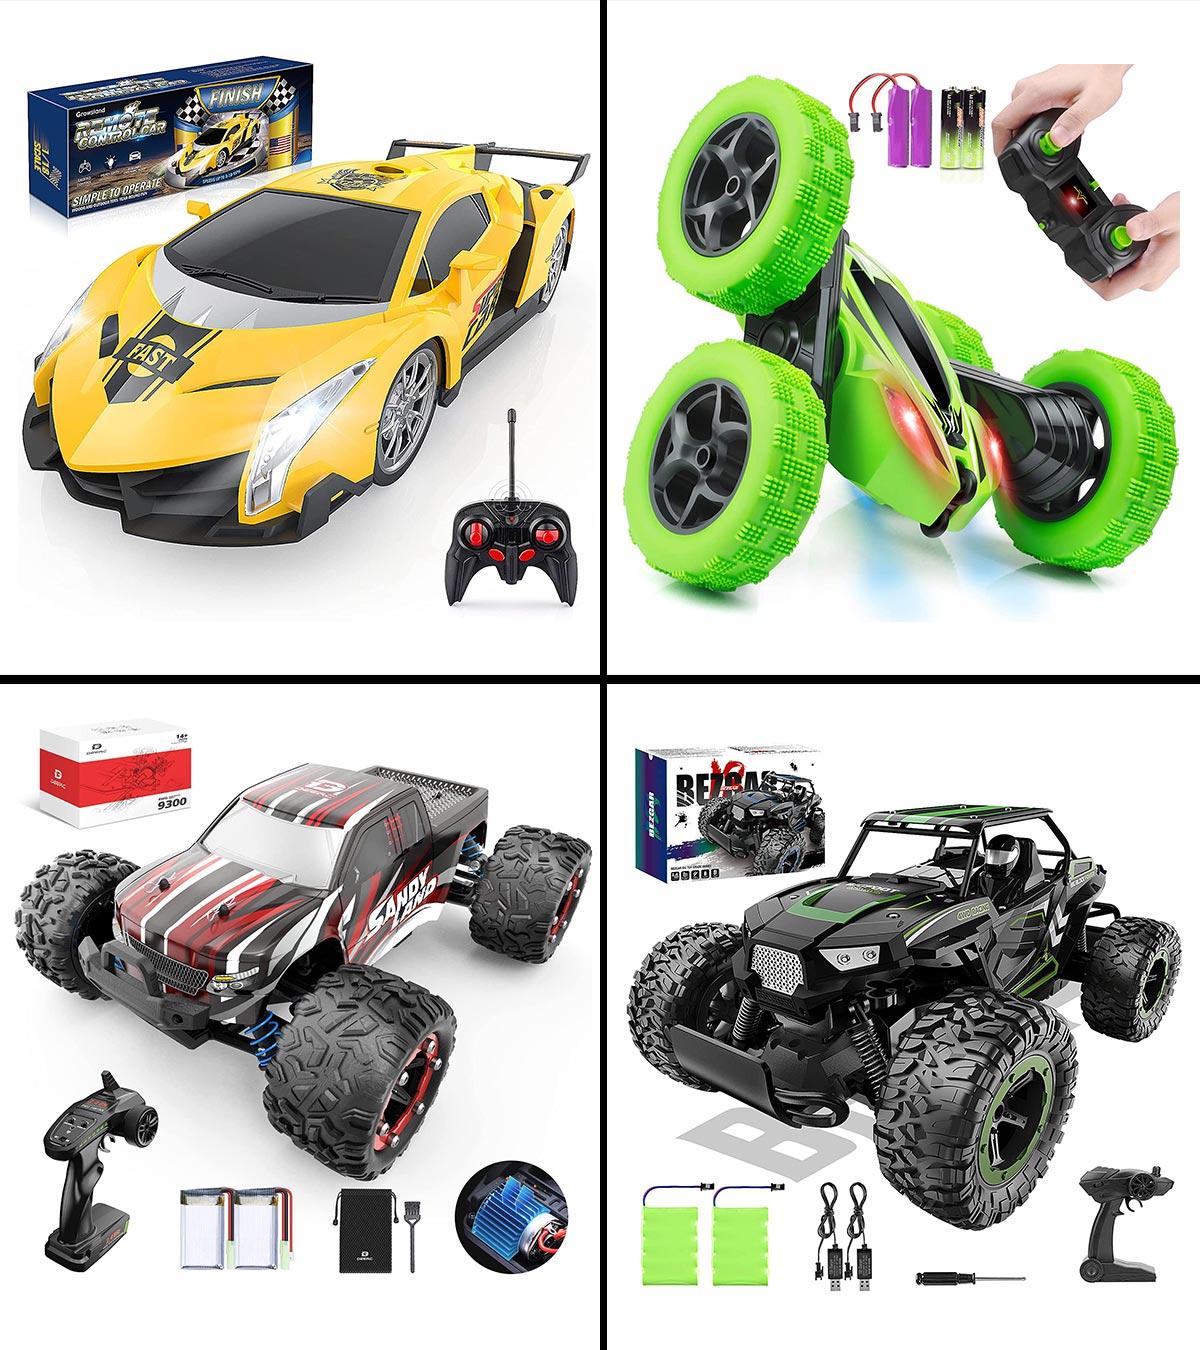 Remote Control Car With Lights: Different types of remote control cars with lightsDifferent Types of RC Cars with Lights